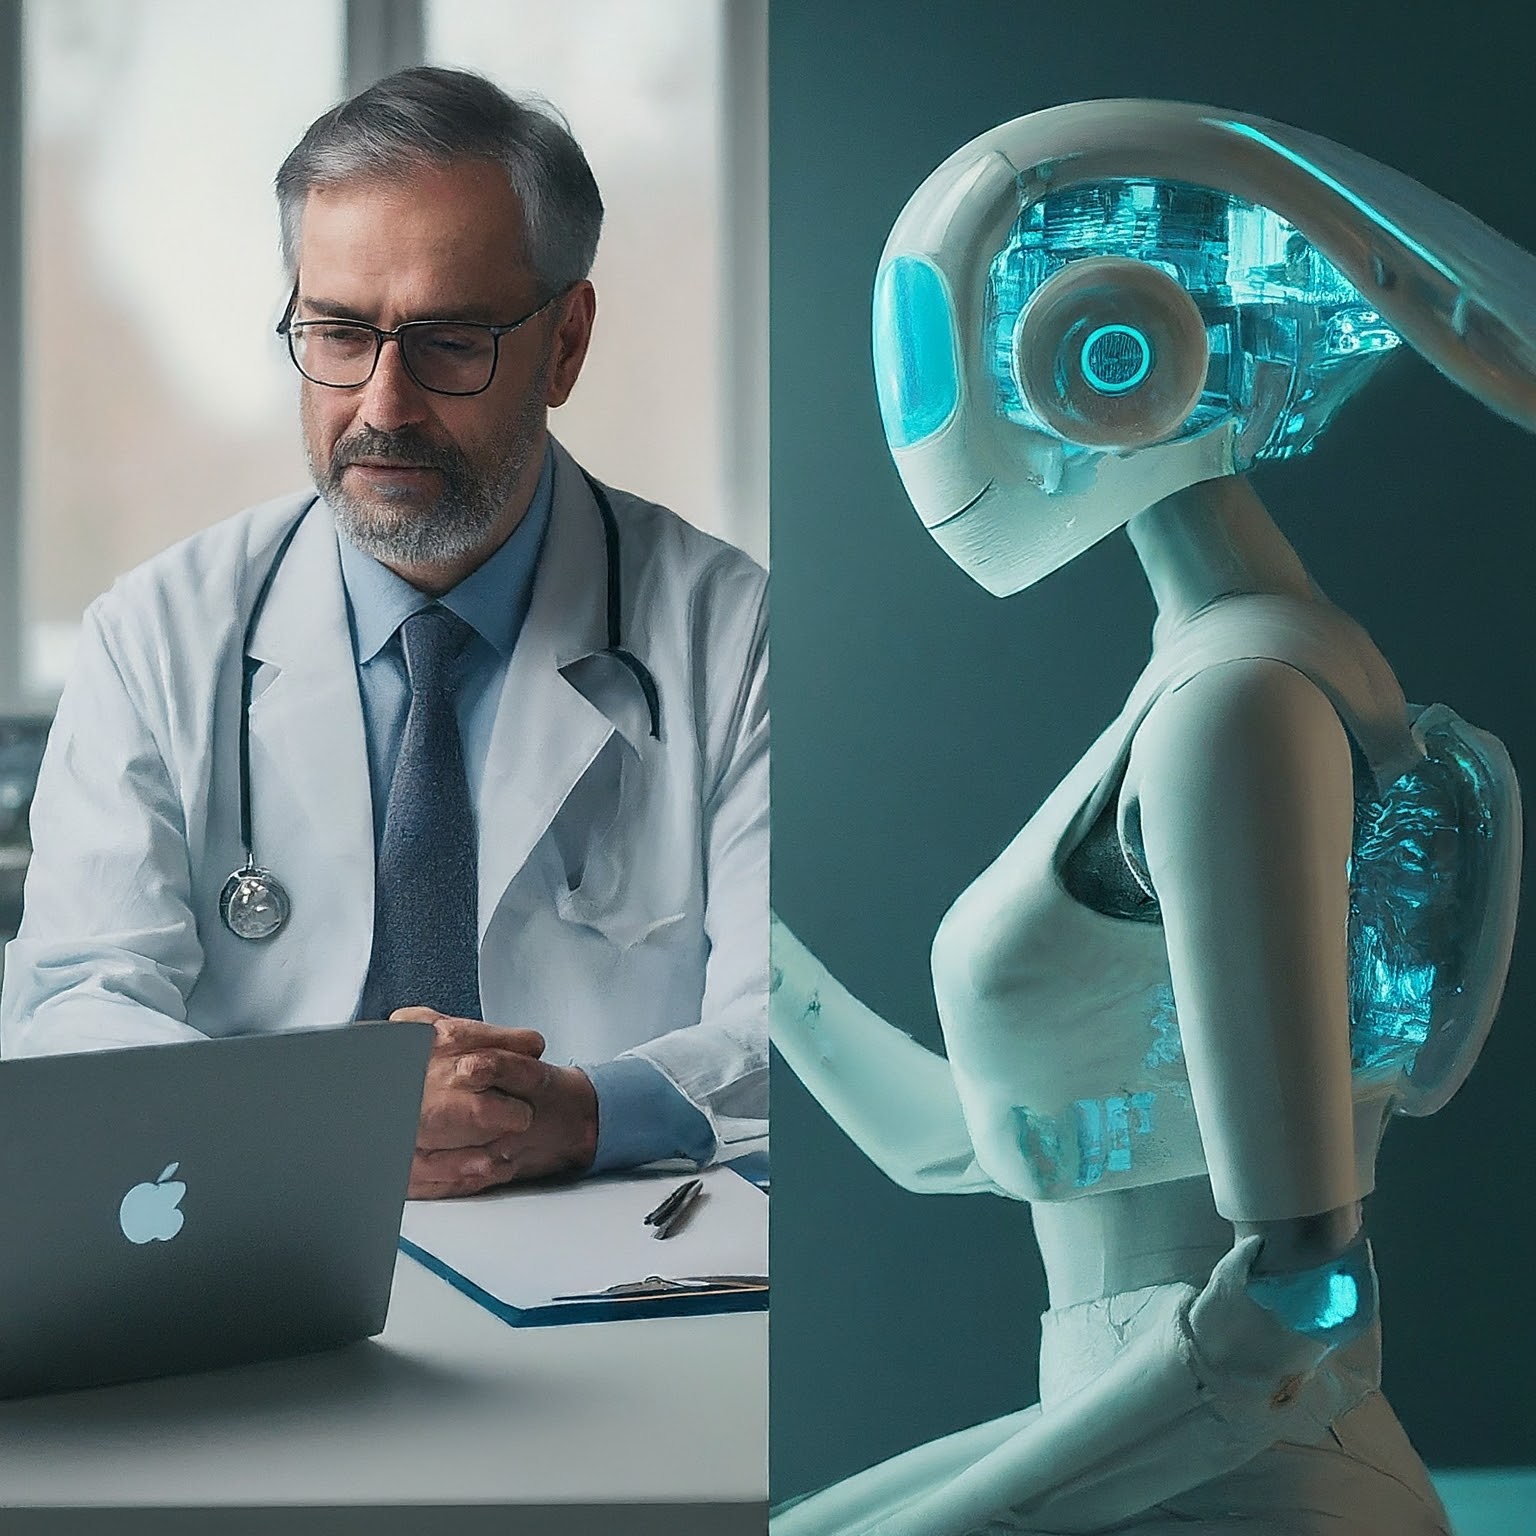 Artificial intelligence in healthacre